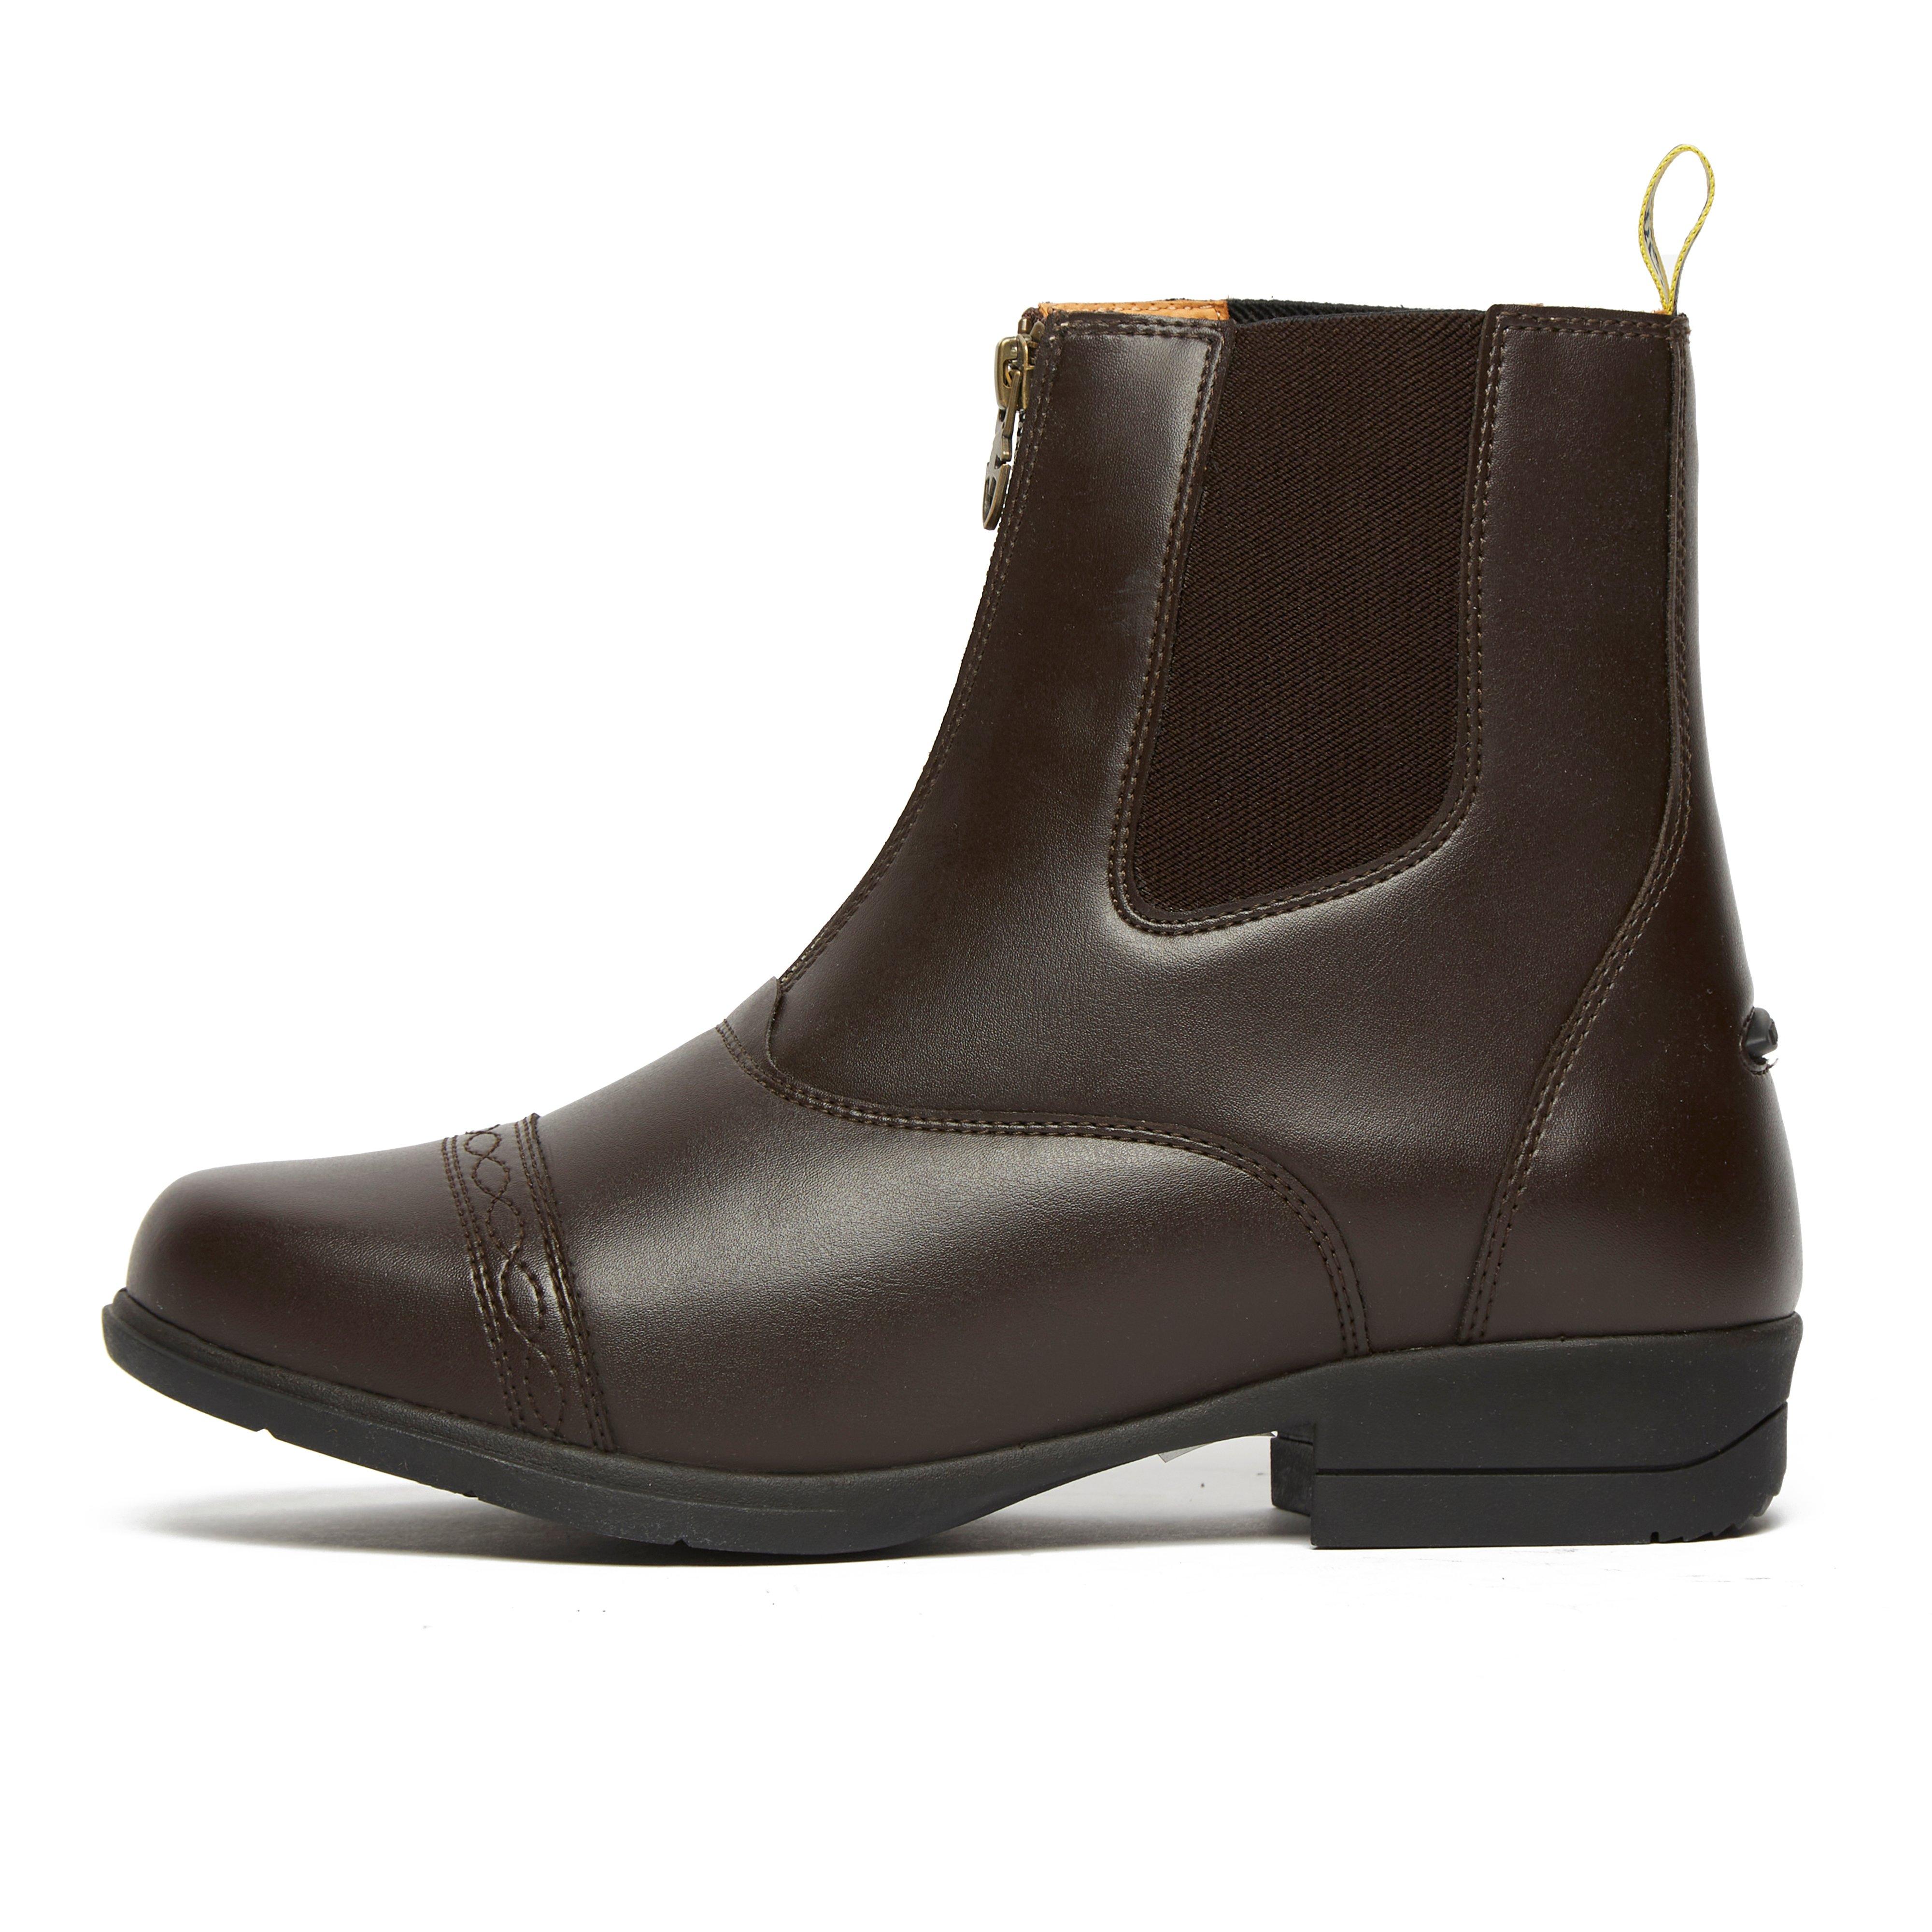 Adults Clio Paddock Boots Brown